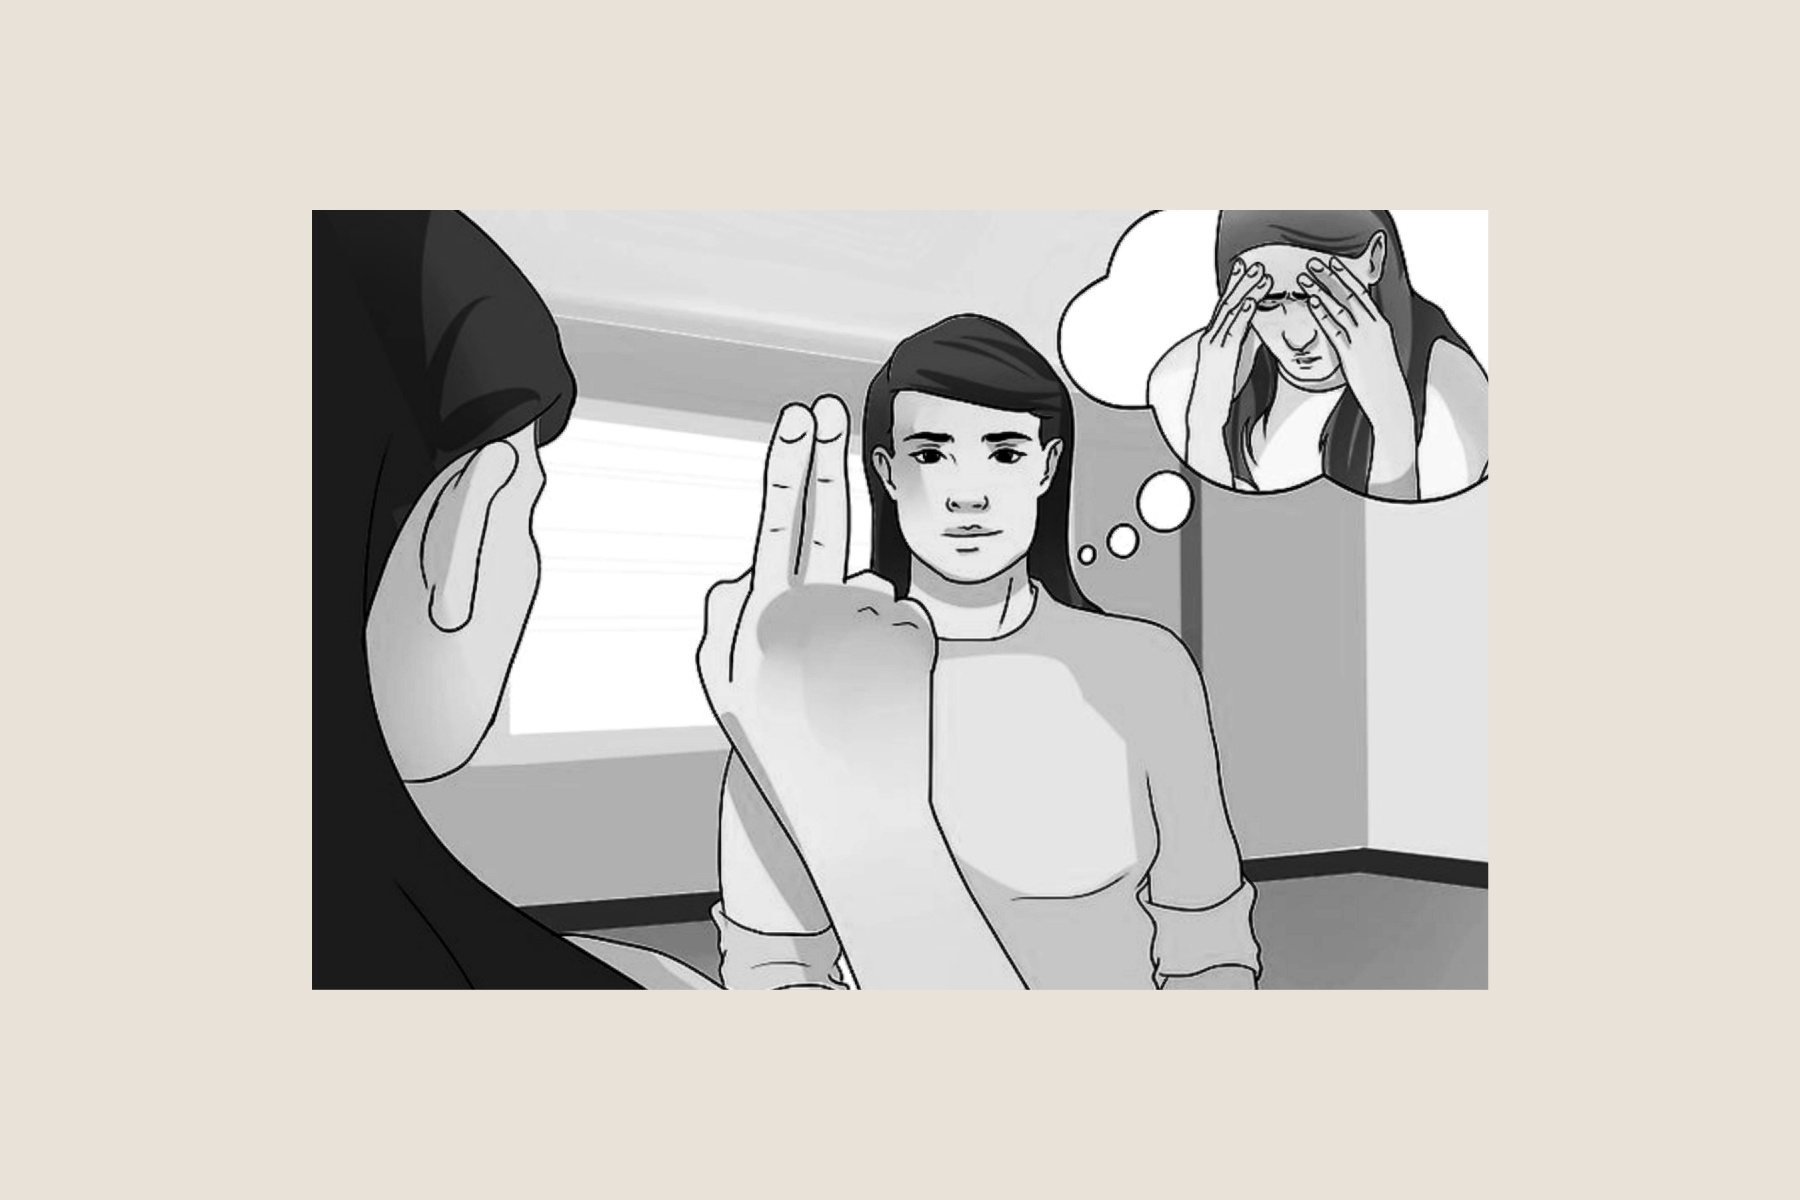 Drawing of a person stoically facing the viewer with a thought bubble of themself crying. In the foreground, facing the person another person holds up their hand with two fingers up.